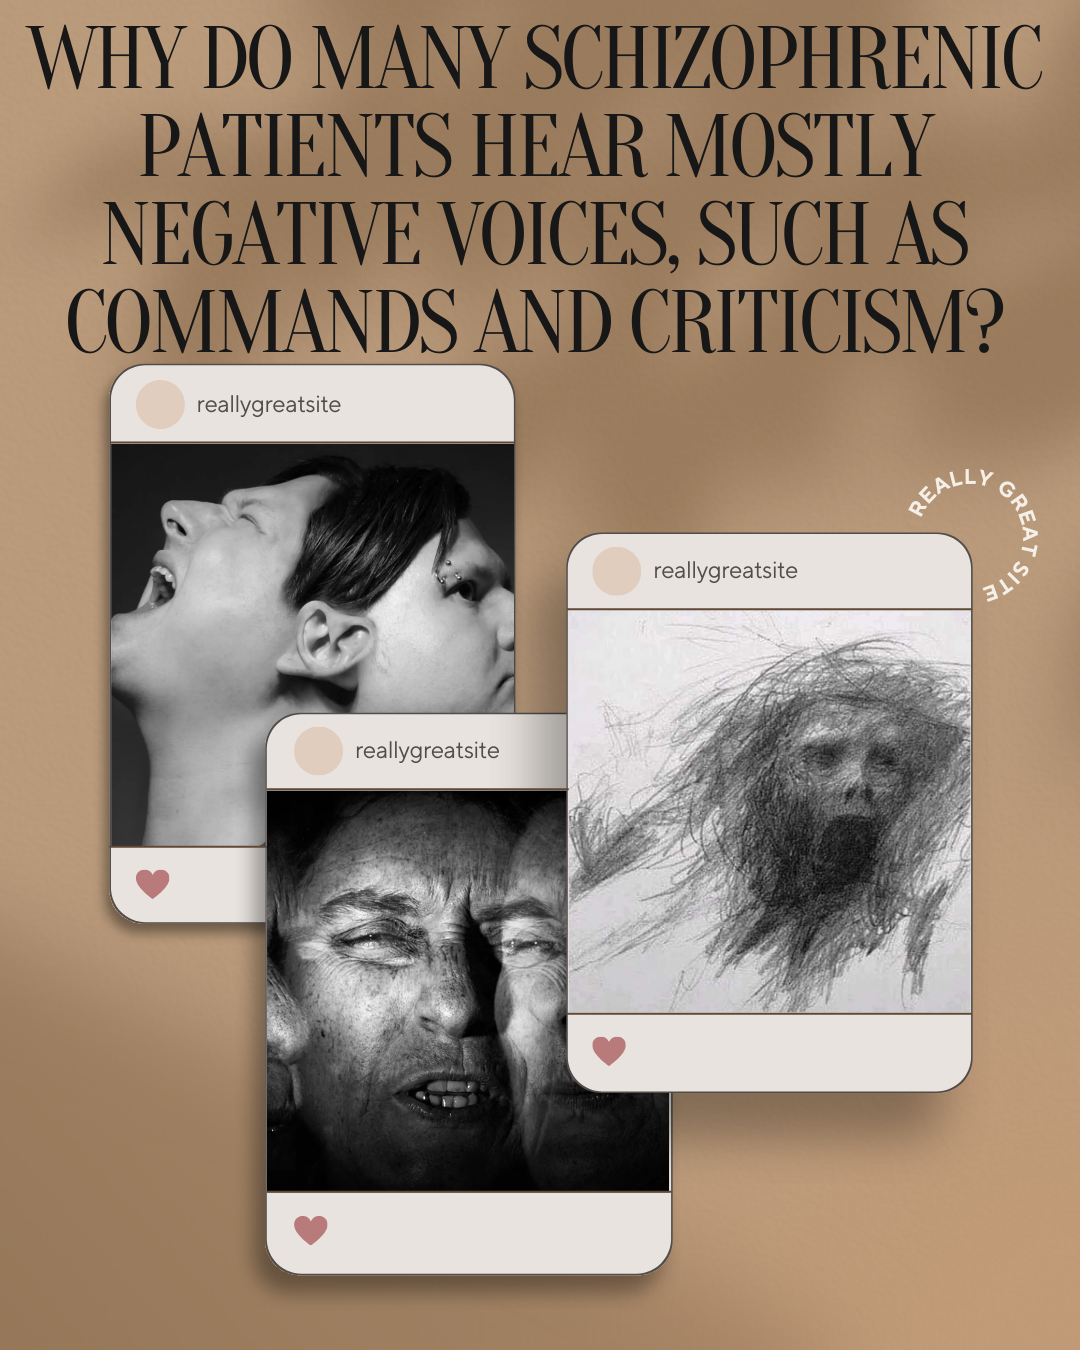 Why do many schizophrenic patients hear mostly negative voices, such as commands and criticism?